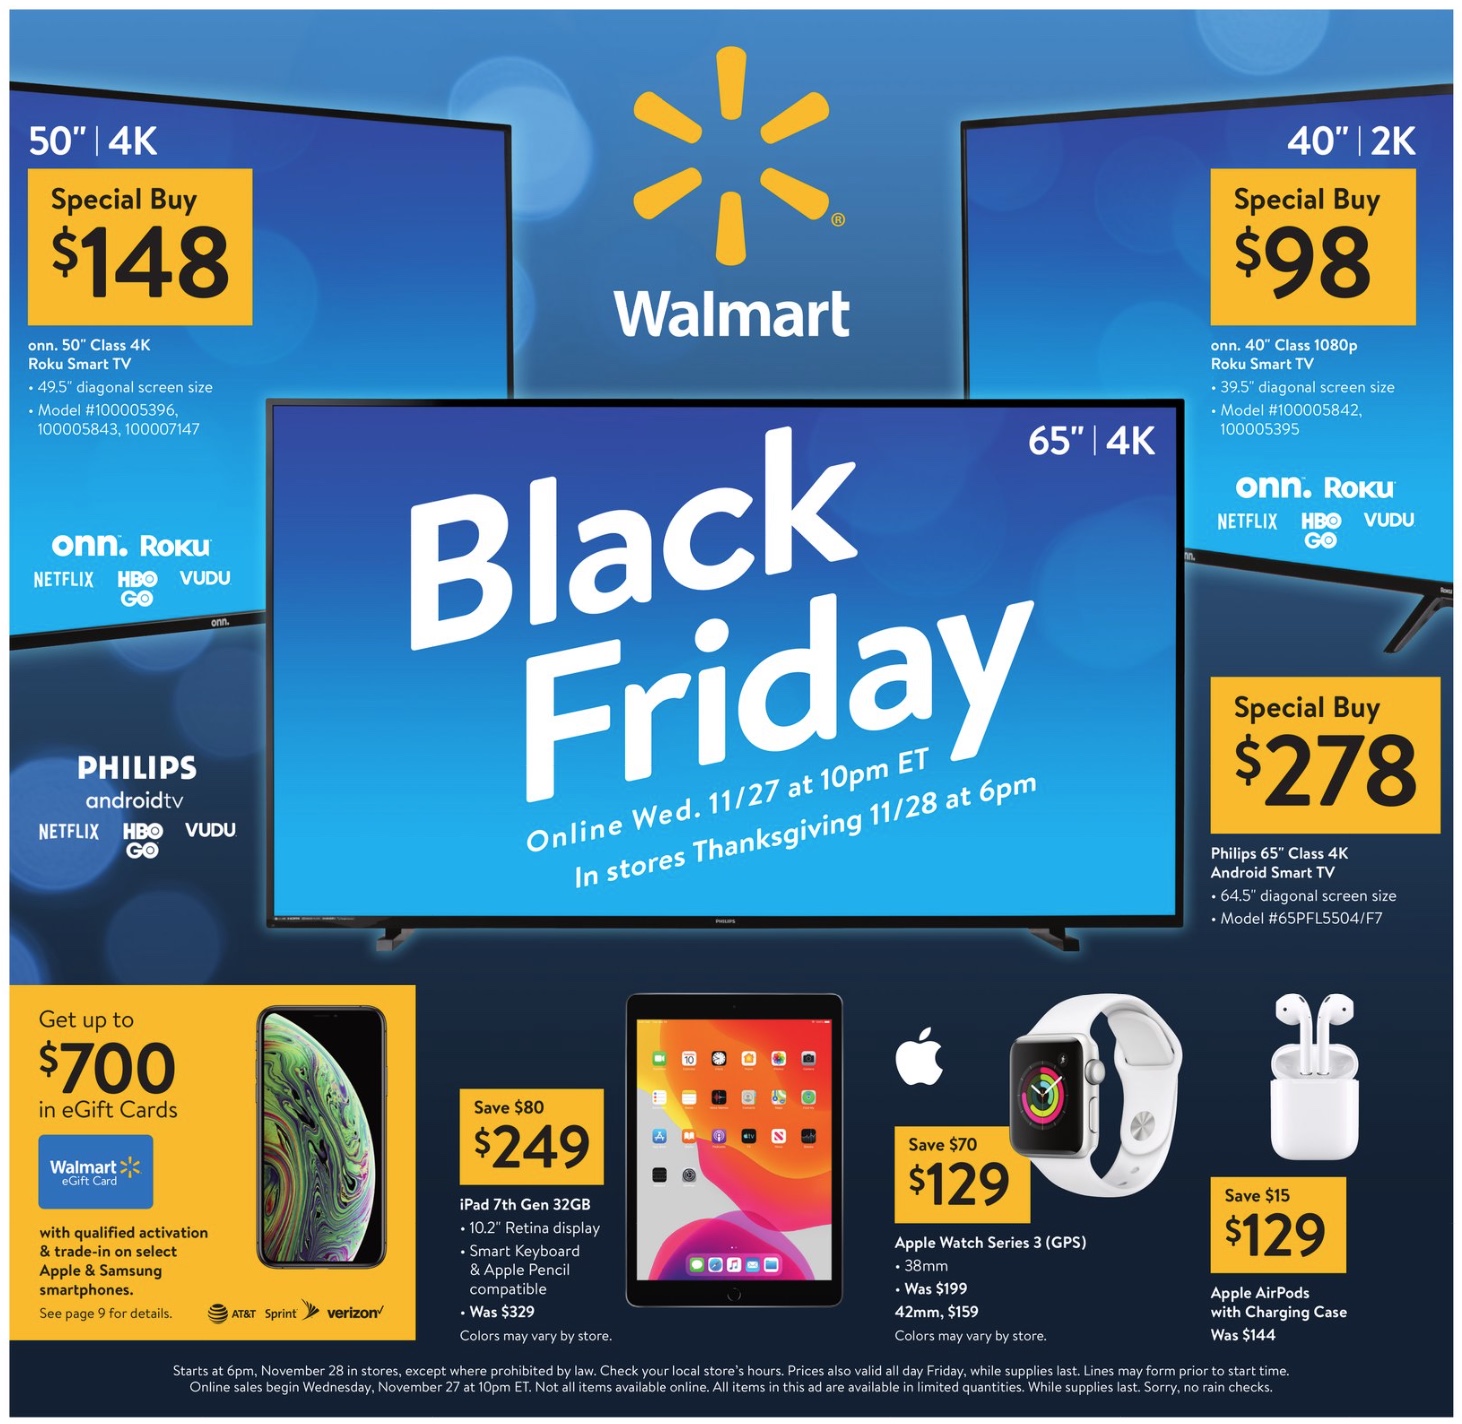 Details Of Walmart S Apple Discounts On Black Friday 2019 Save On Ipads Iphones Apple Watch Airpods And More